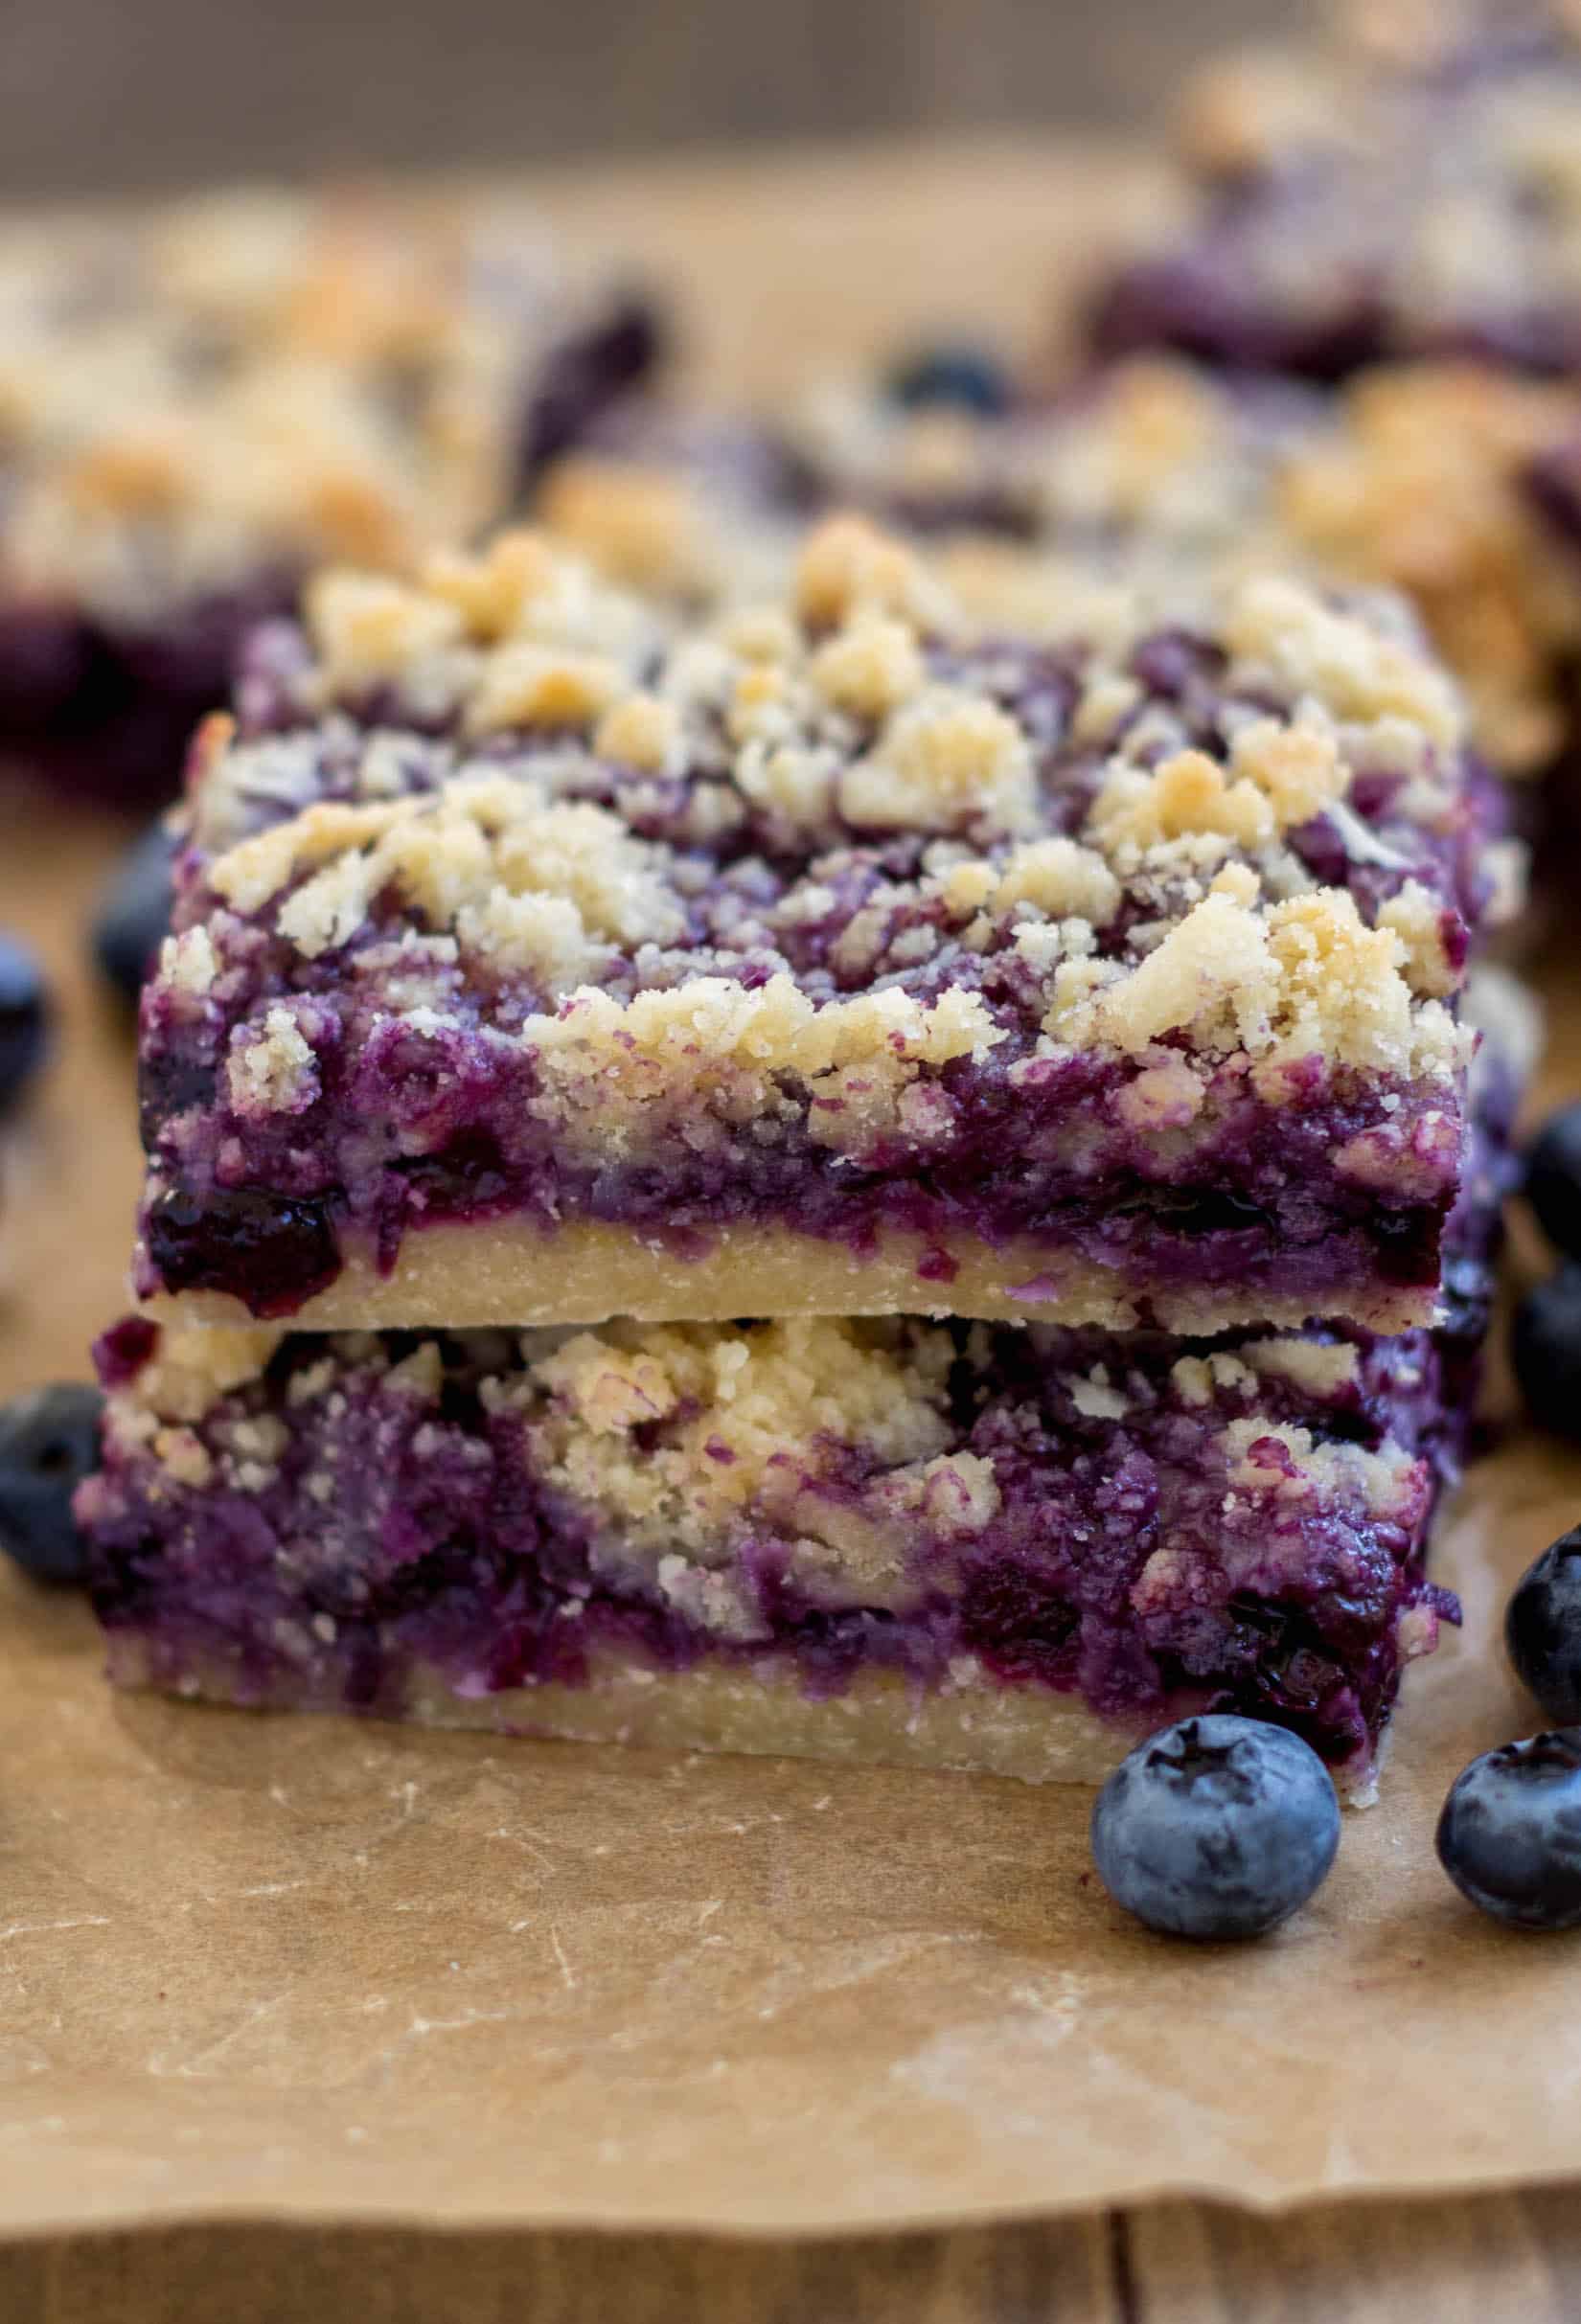 Coconut Blueberry Bars - Gooey blueberry coconut bars with a shortbread-like crust and a deliciously sweet crumb topping.